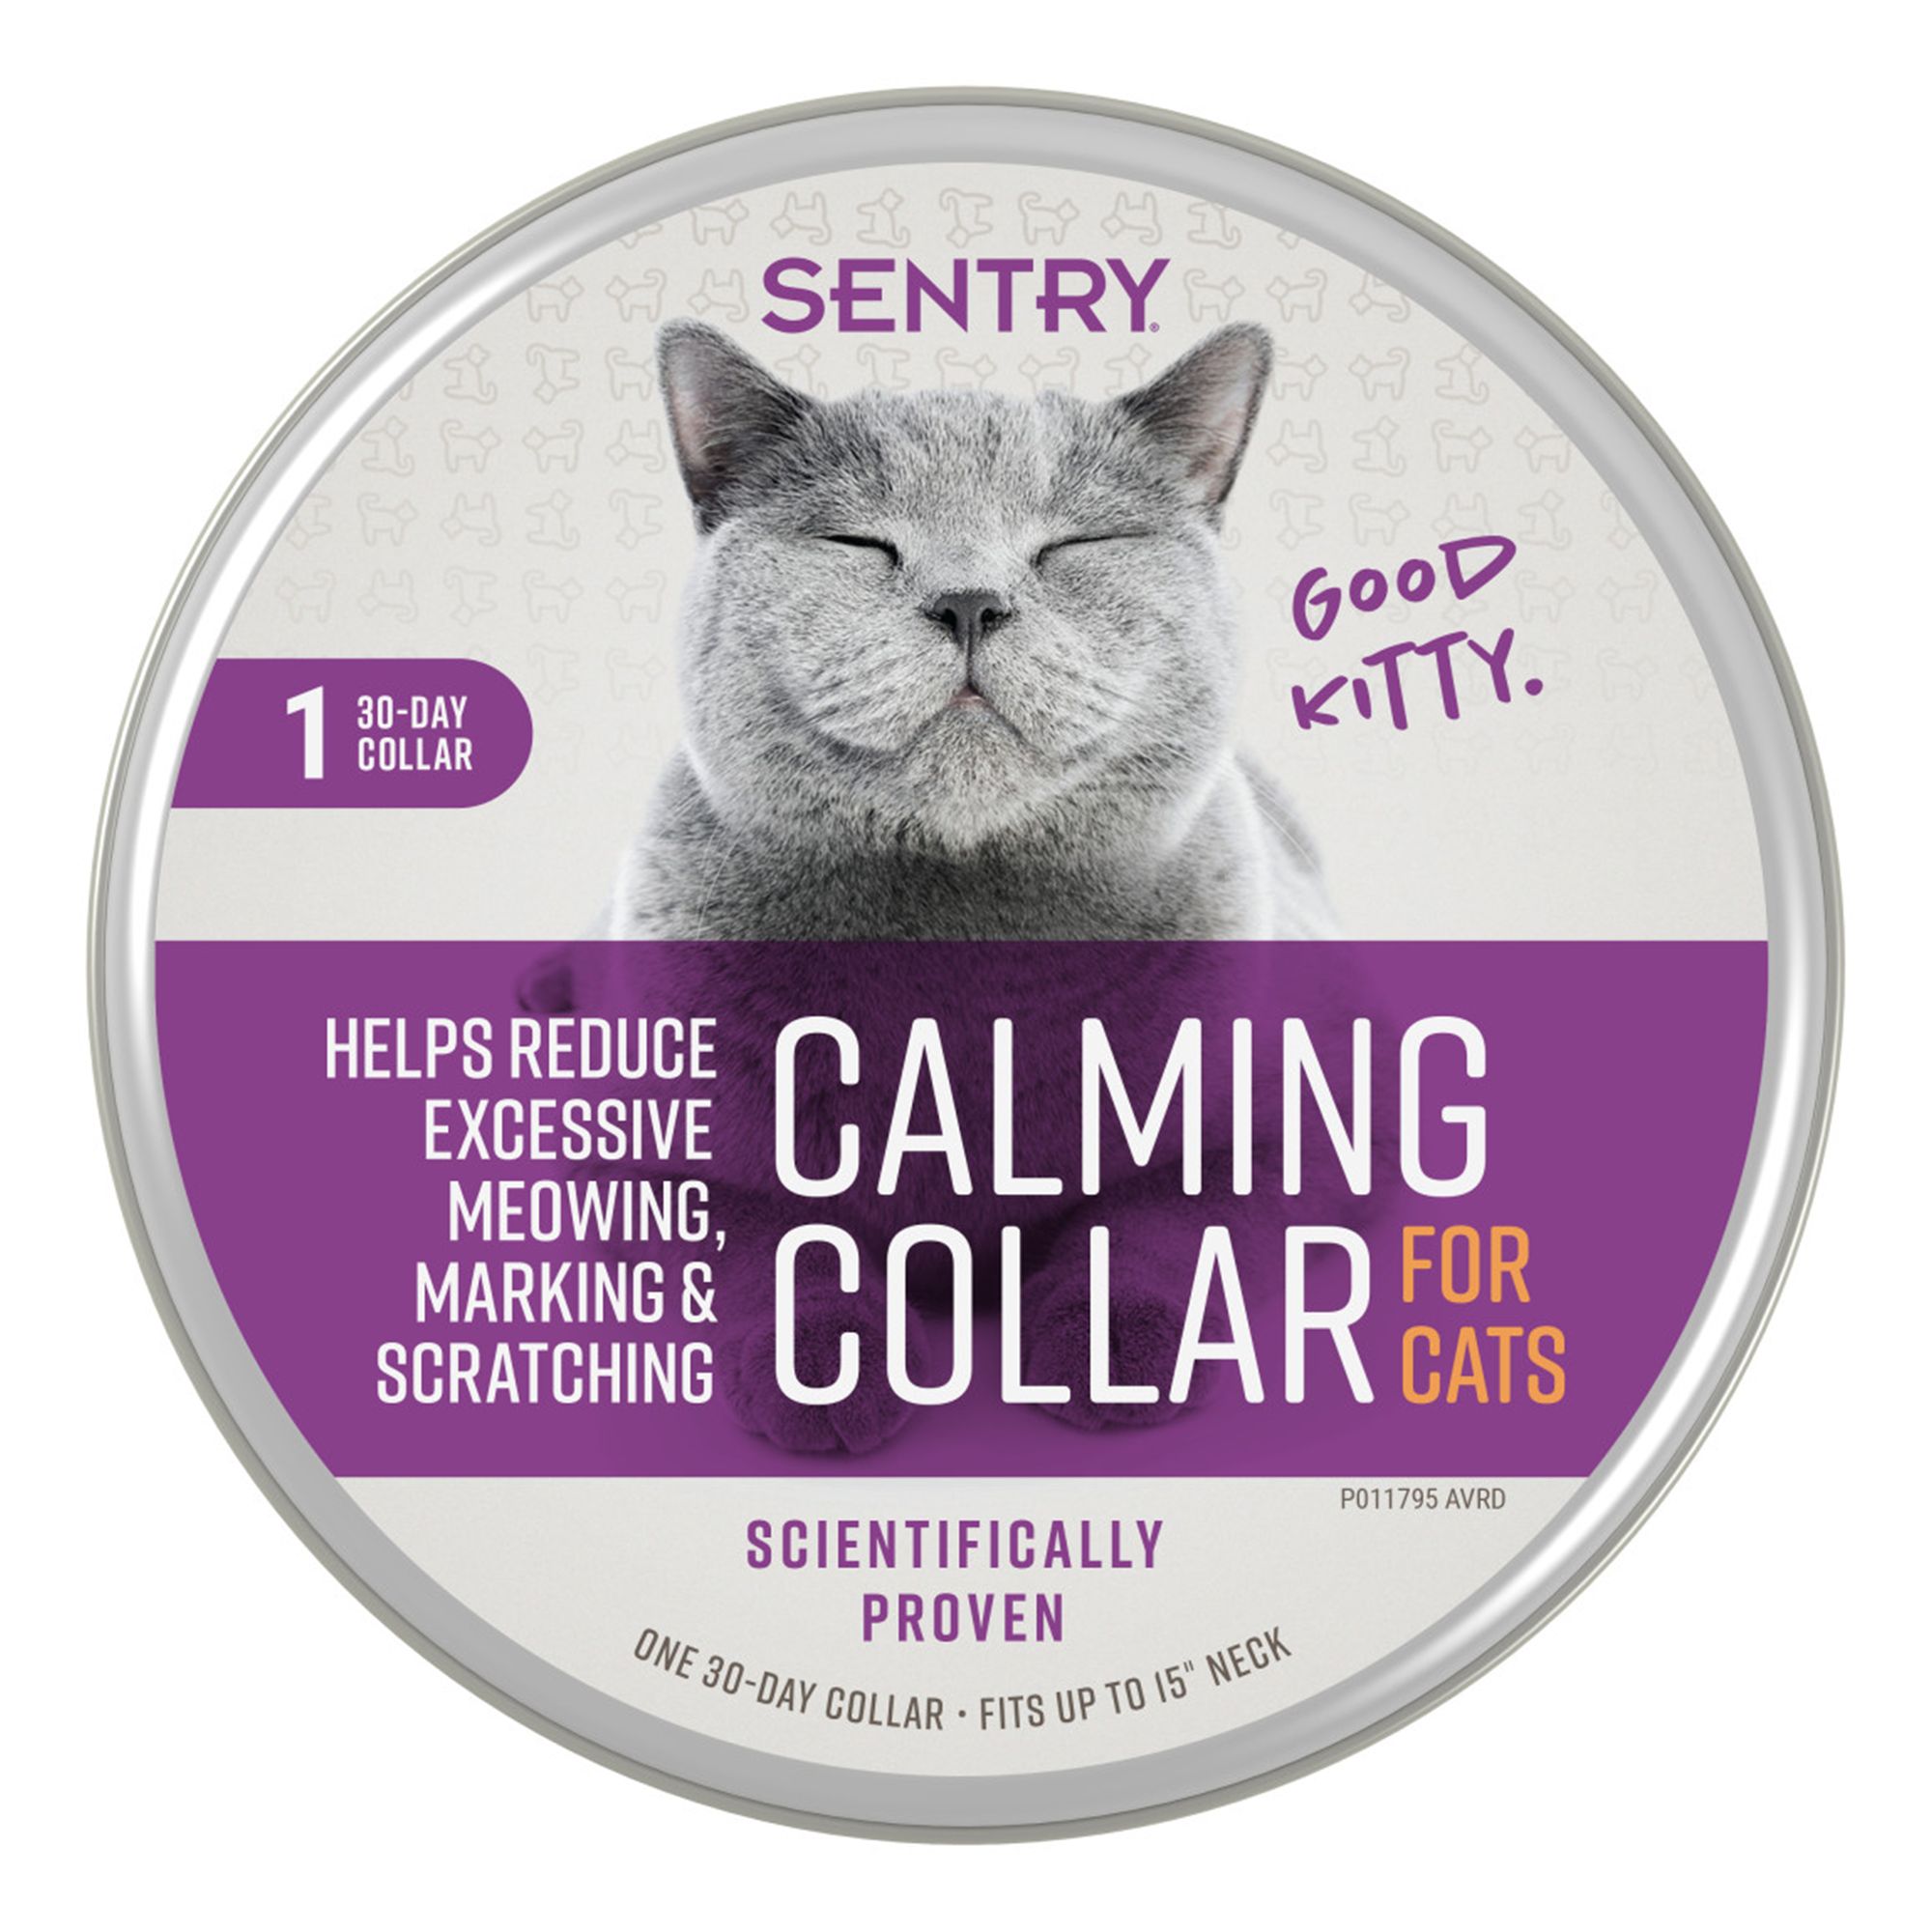 Sentry Calming Collar For Cats 